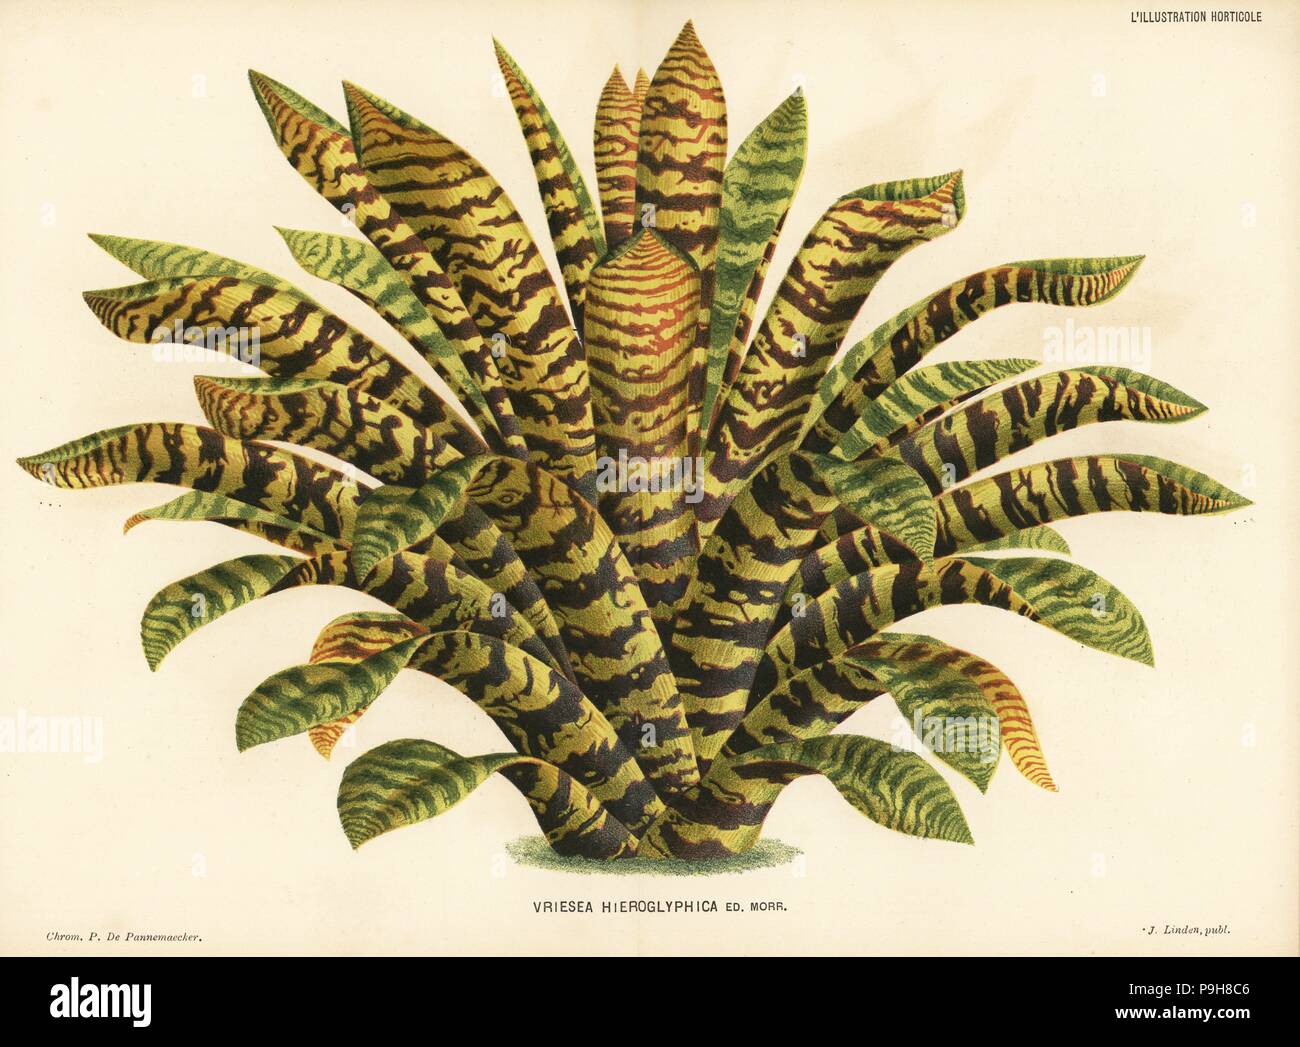 King of the bromeliads, Vriesea hieroglyphica. Chromolithograph by Pieter de Pannemaeker from Jean Linden's l'Illustration Horticole, Brussels, 1884. Stock Photo